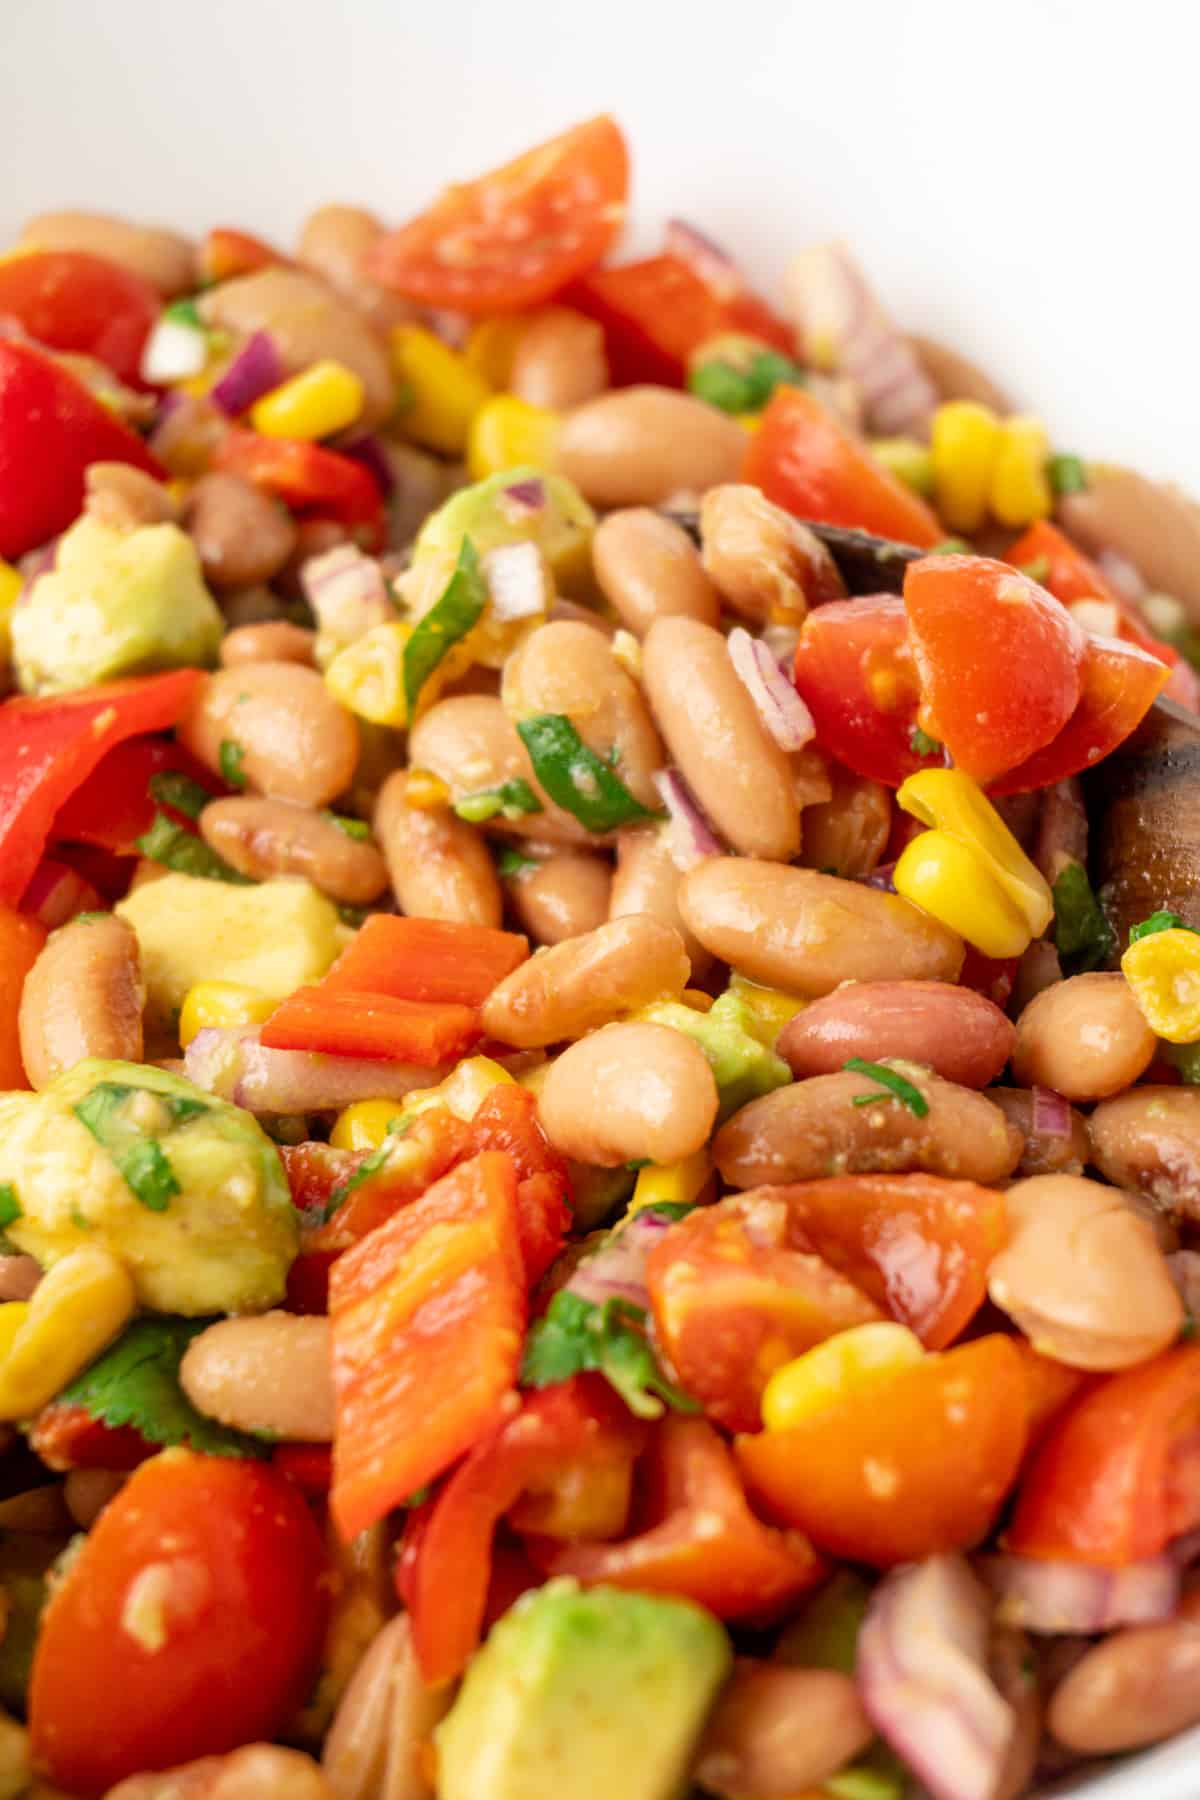 A close up angled shot of the salad prominently featyring cooked pinto beans, sliced cherry tomatoes and diced red pepper in a richly flavoured salad dressing.